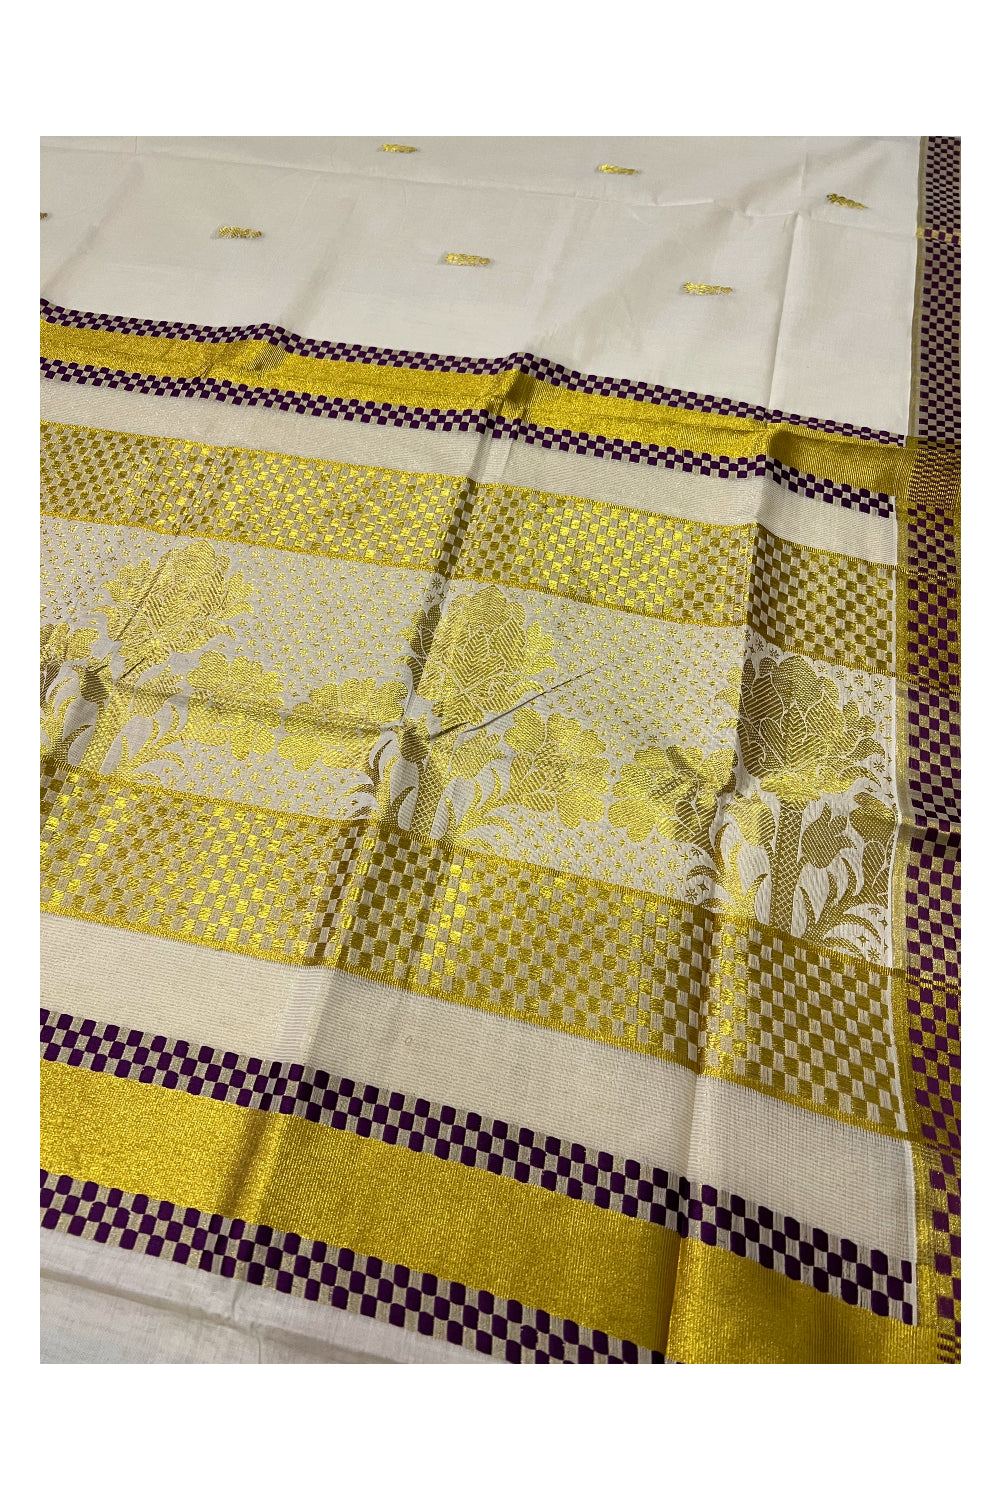 Pure Cotton Kerala Saree with Kasavu Woven Floral Patterns on Body and Purple Golden Border